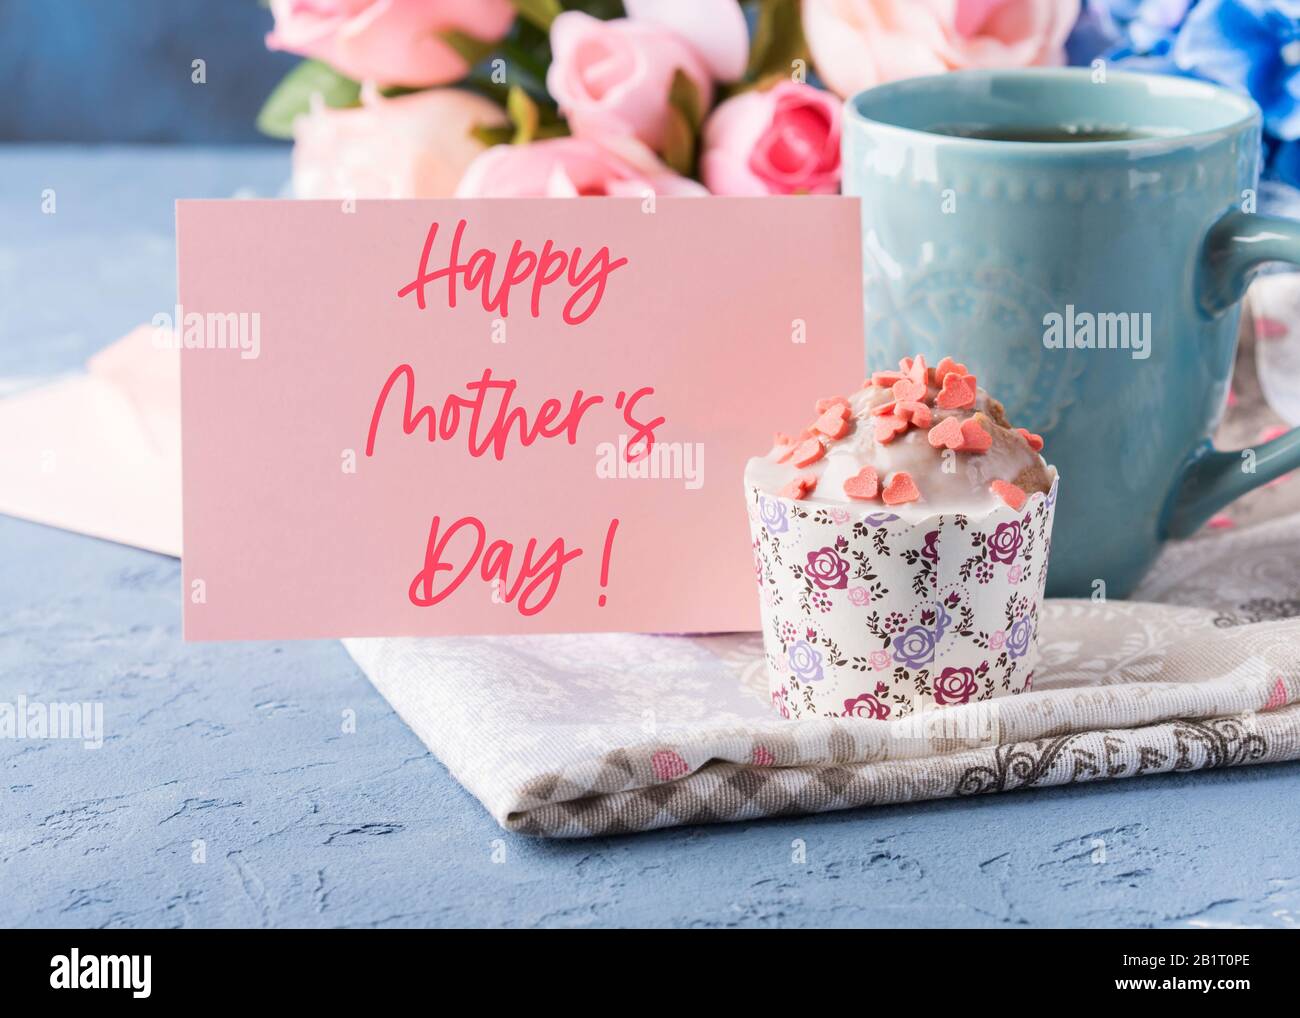 https://c8.alamy.com/comp/2B1T0PE/mothers-day-greetings-with-muffin-cup-tea-2B1T0PE.jpg